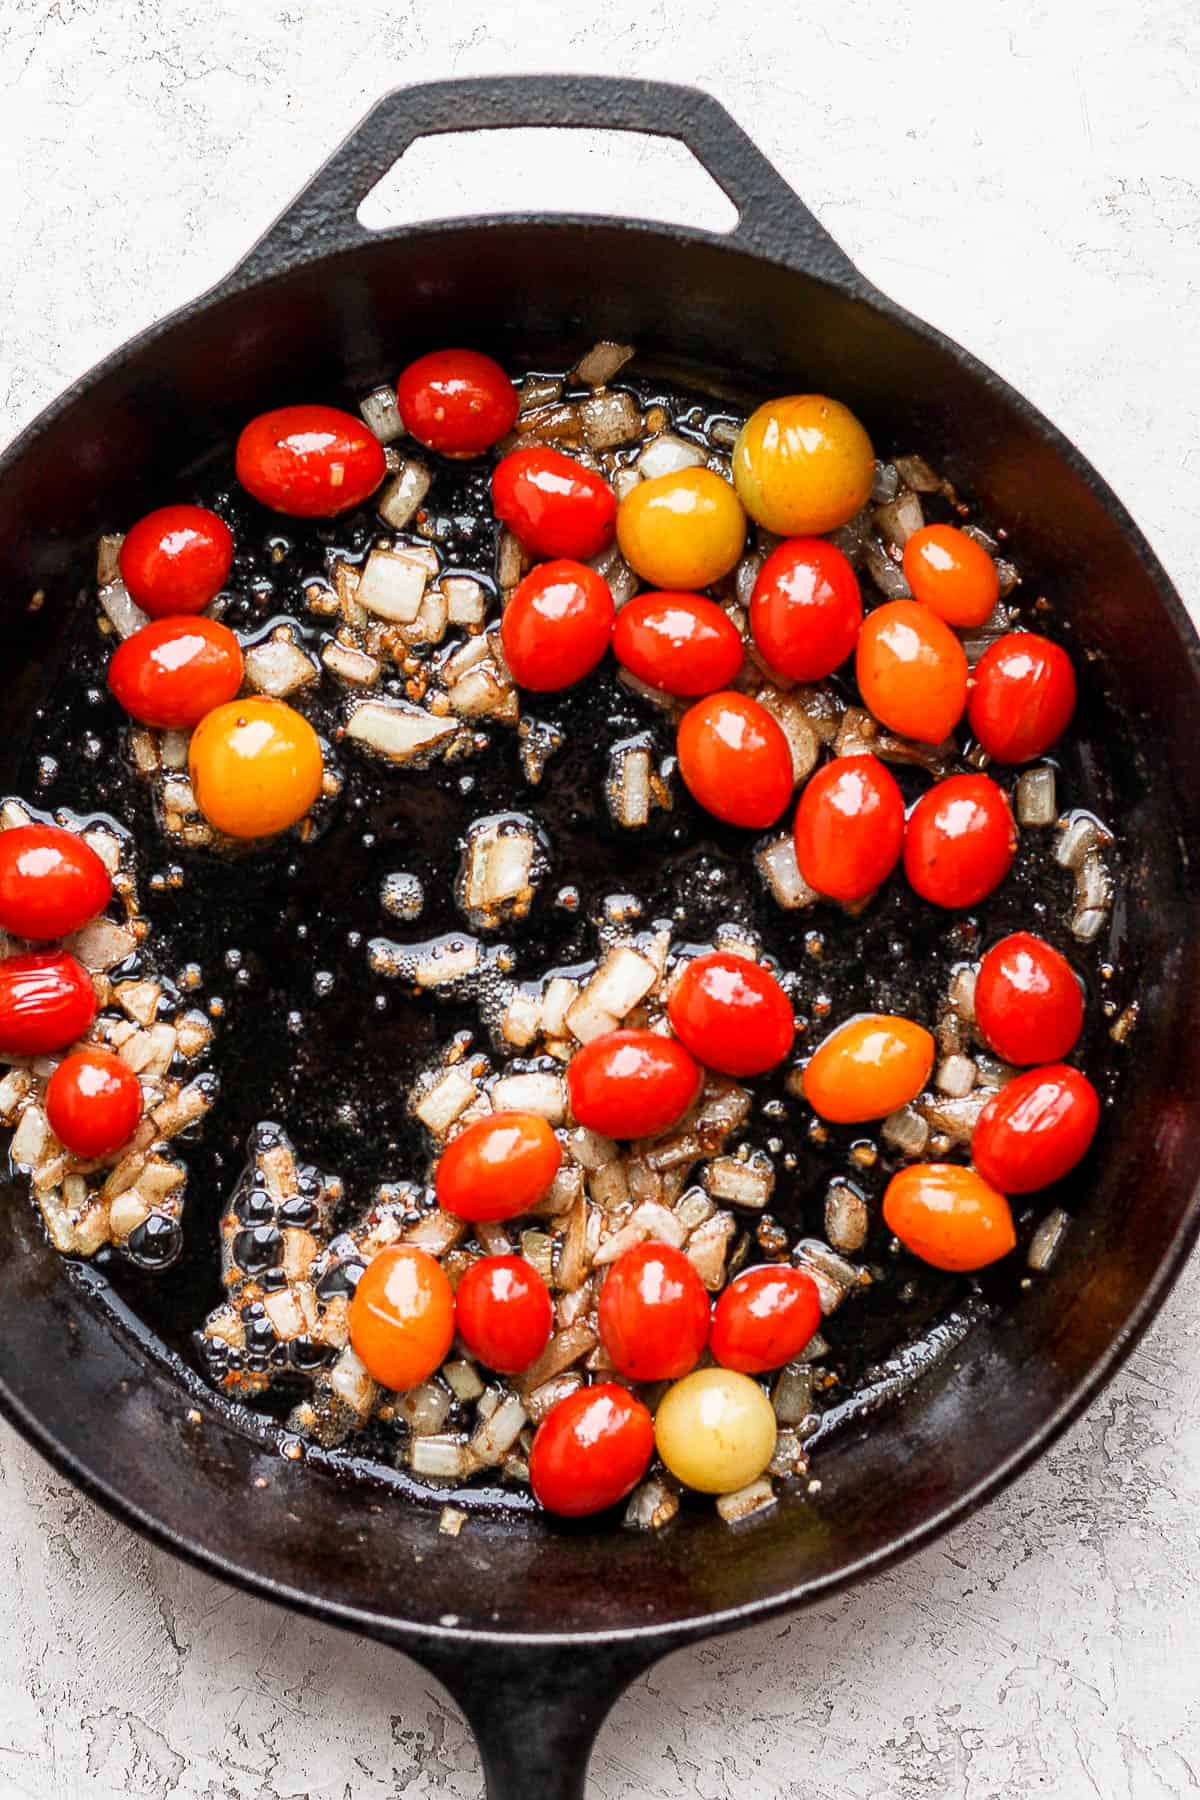 Cherry tomatoes beginning to burst in the skillet.